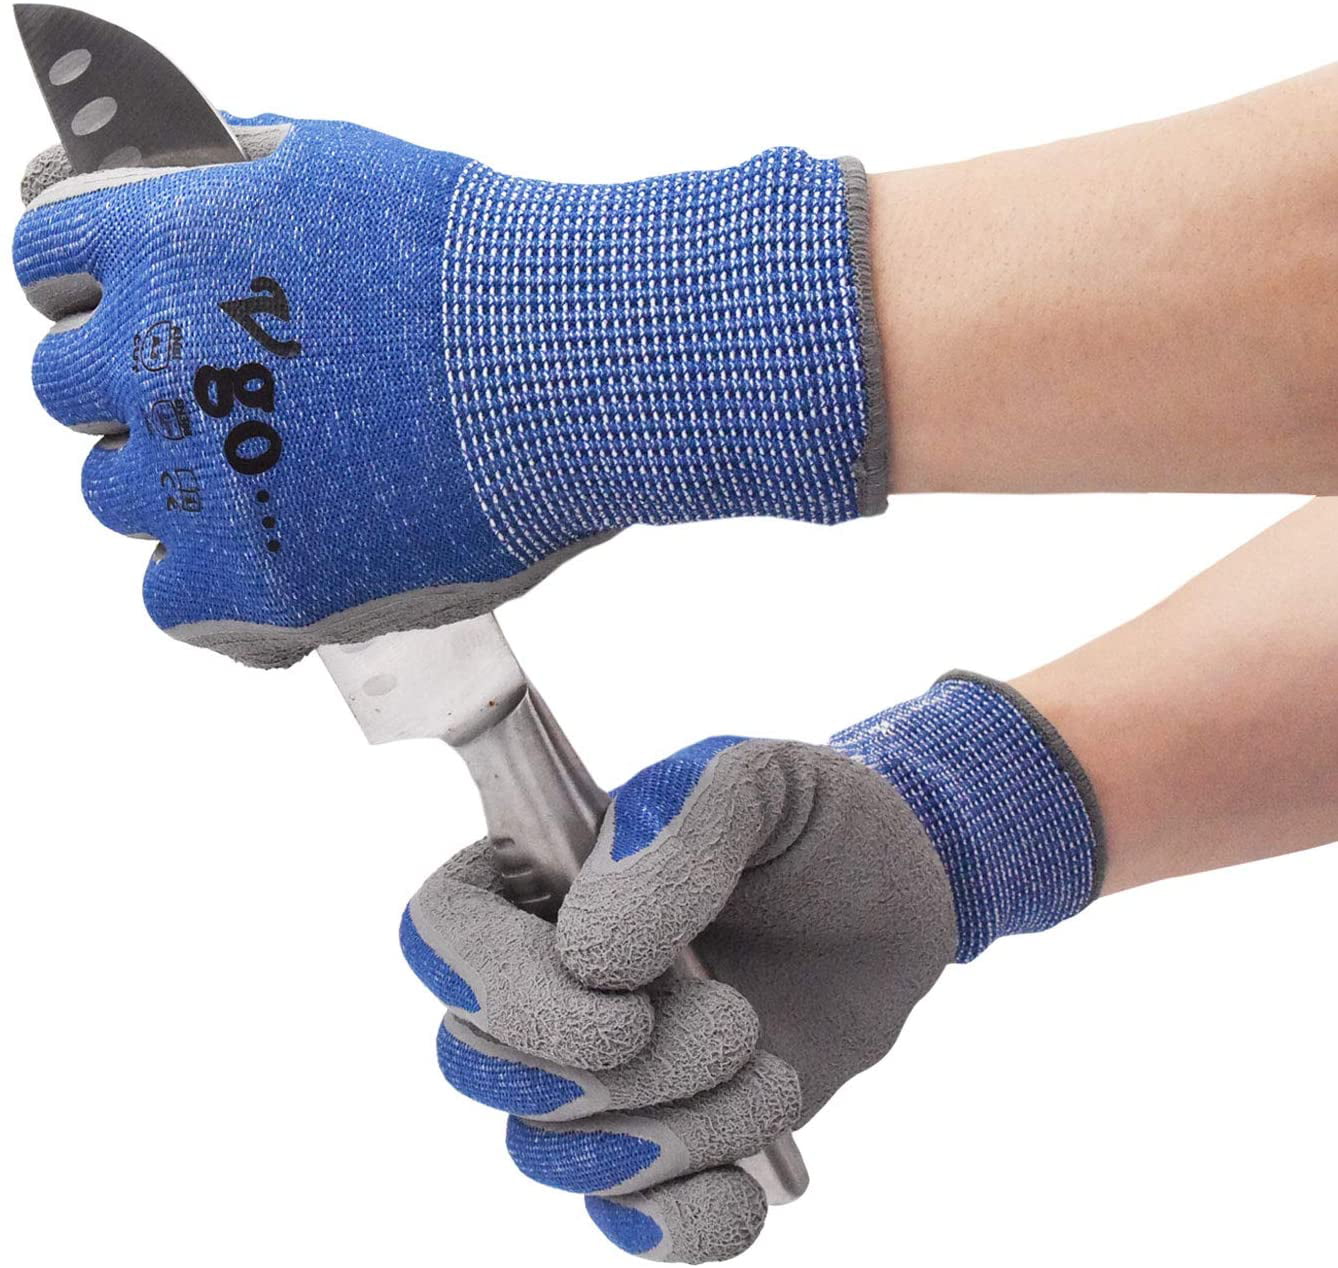 EN388 Vgo 5 Pairs Cut Resistant Gloves High Performance Level 5 Protection 